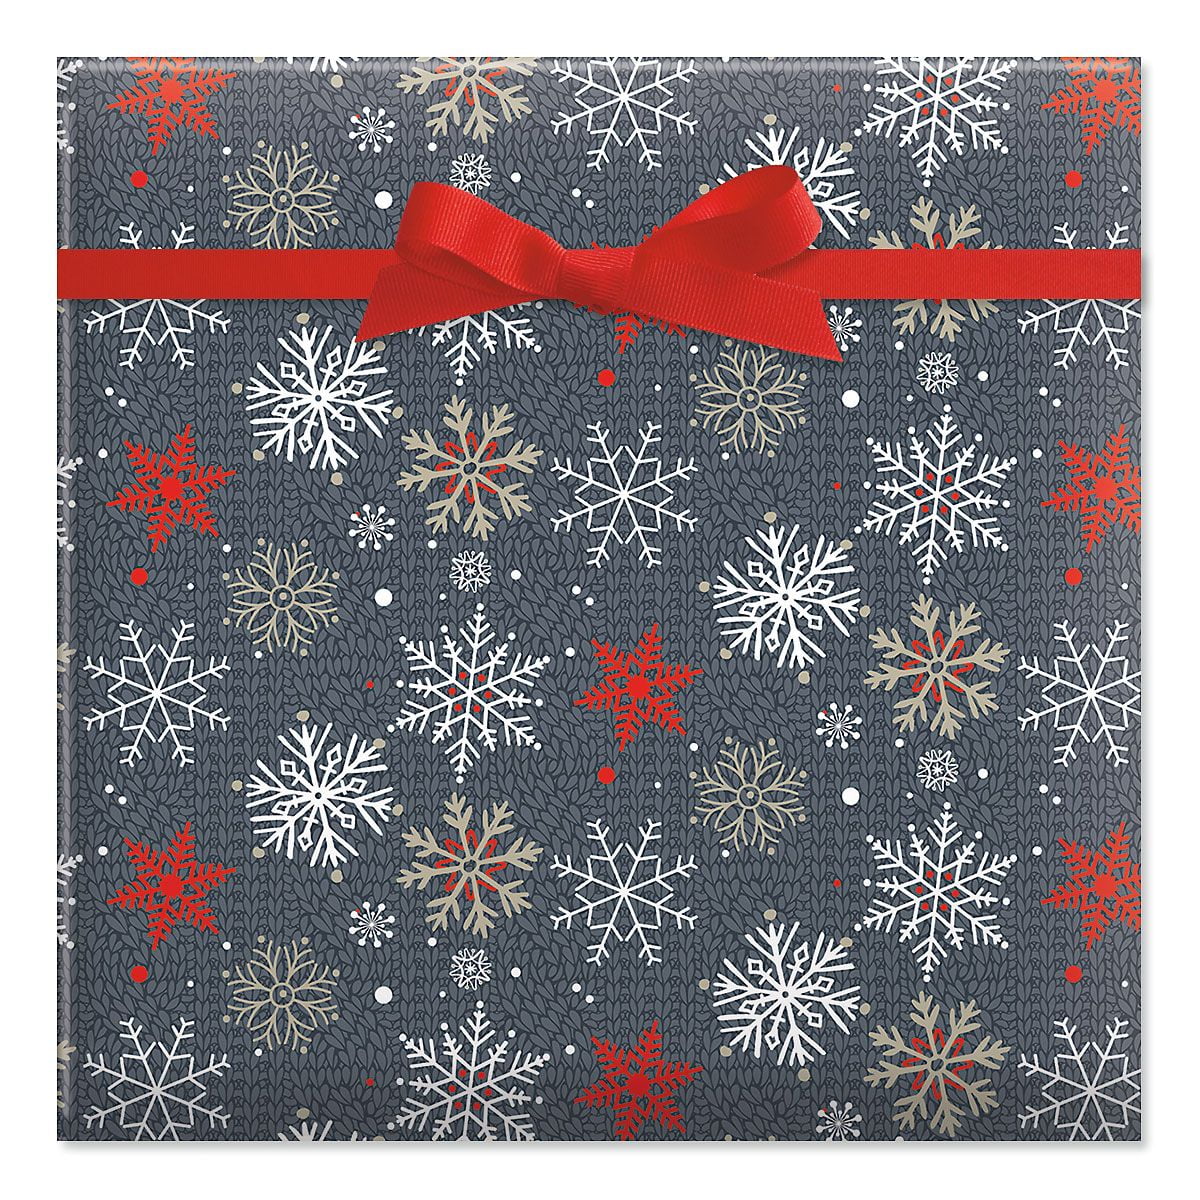 Festival Of Lights Jumbo Wrapping Paper